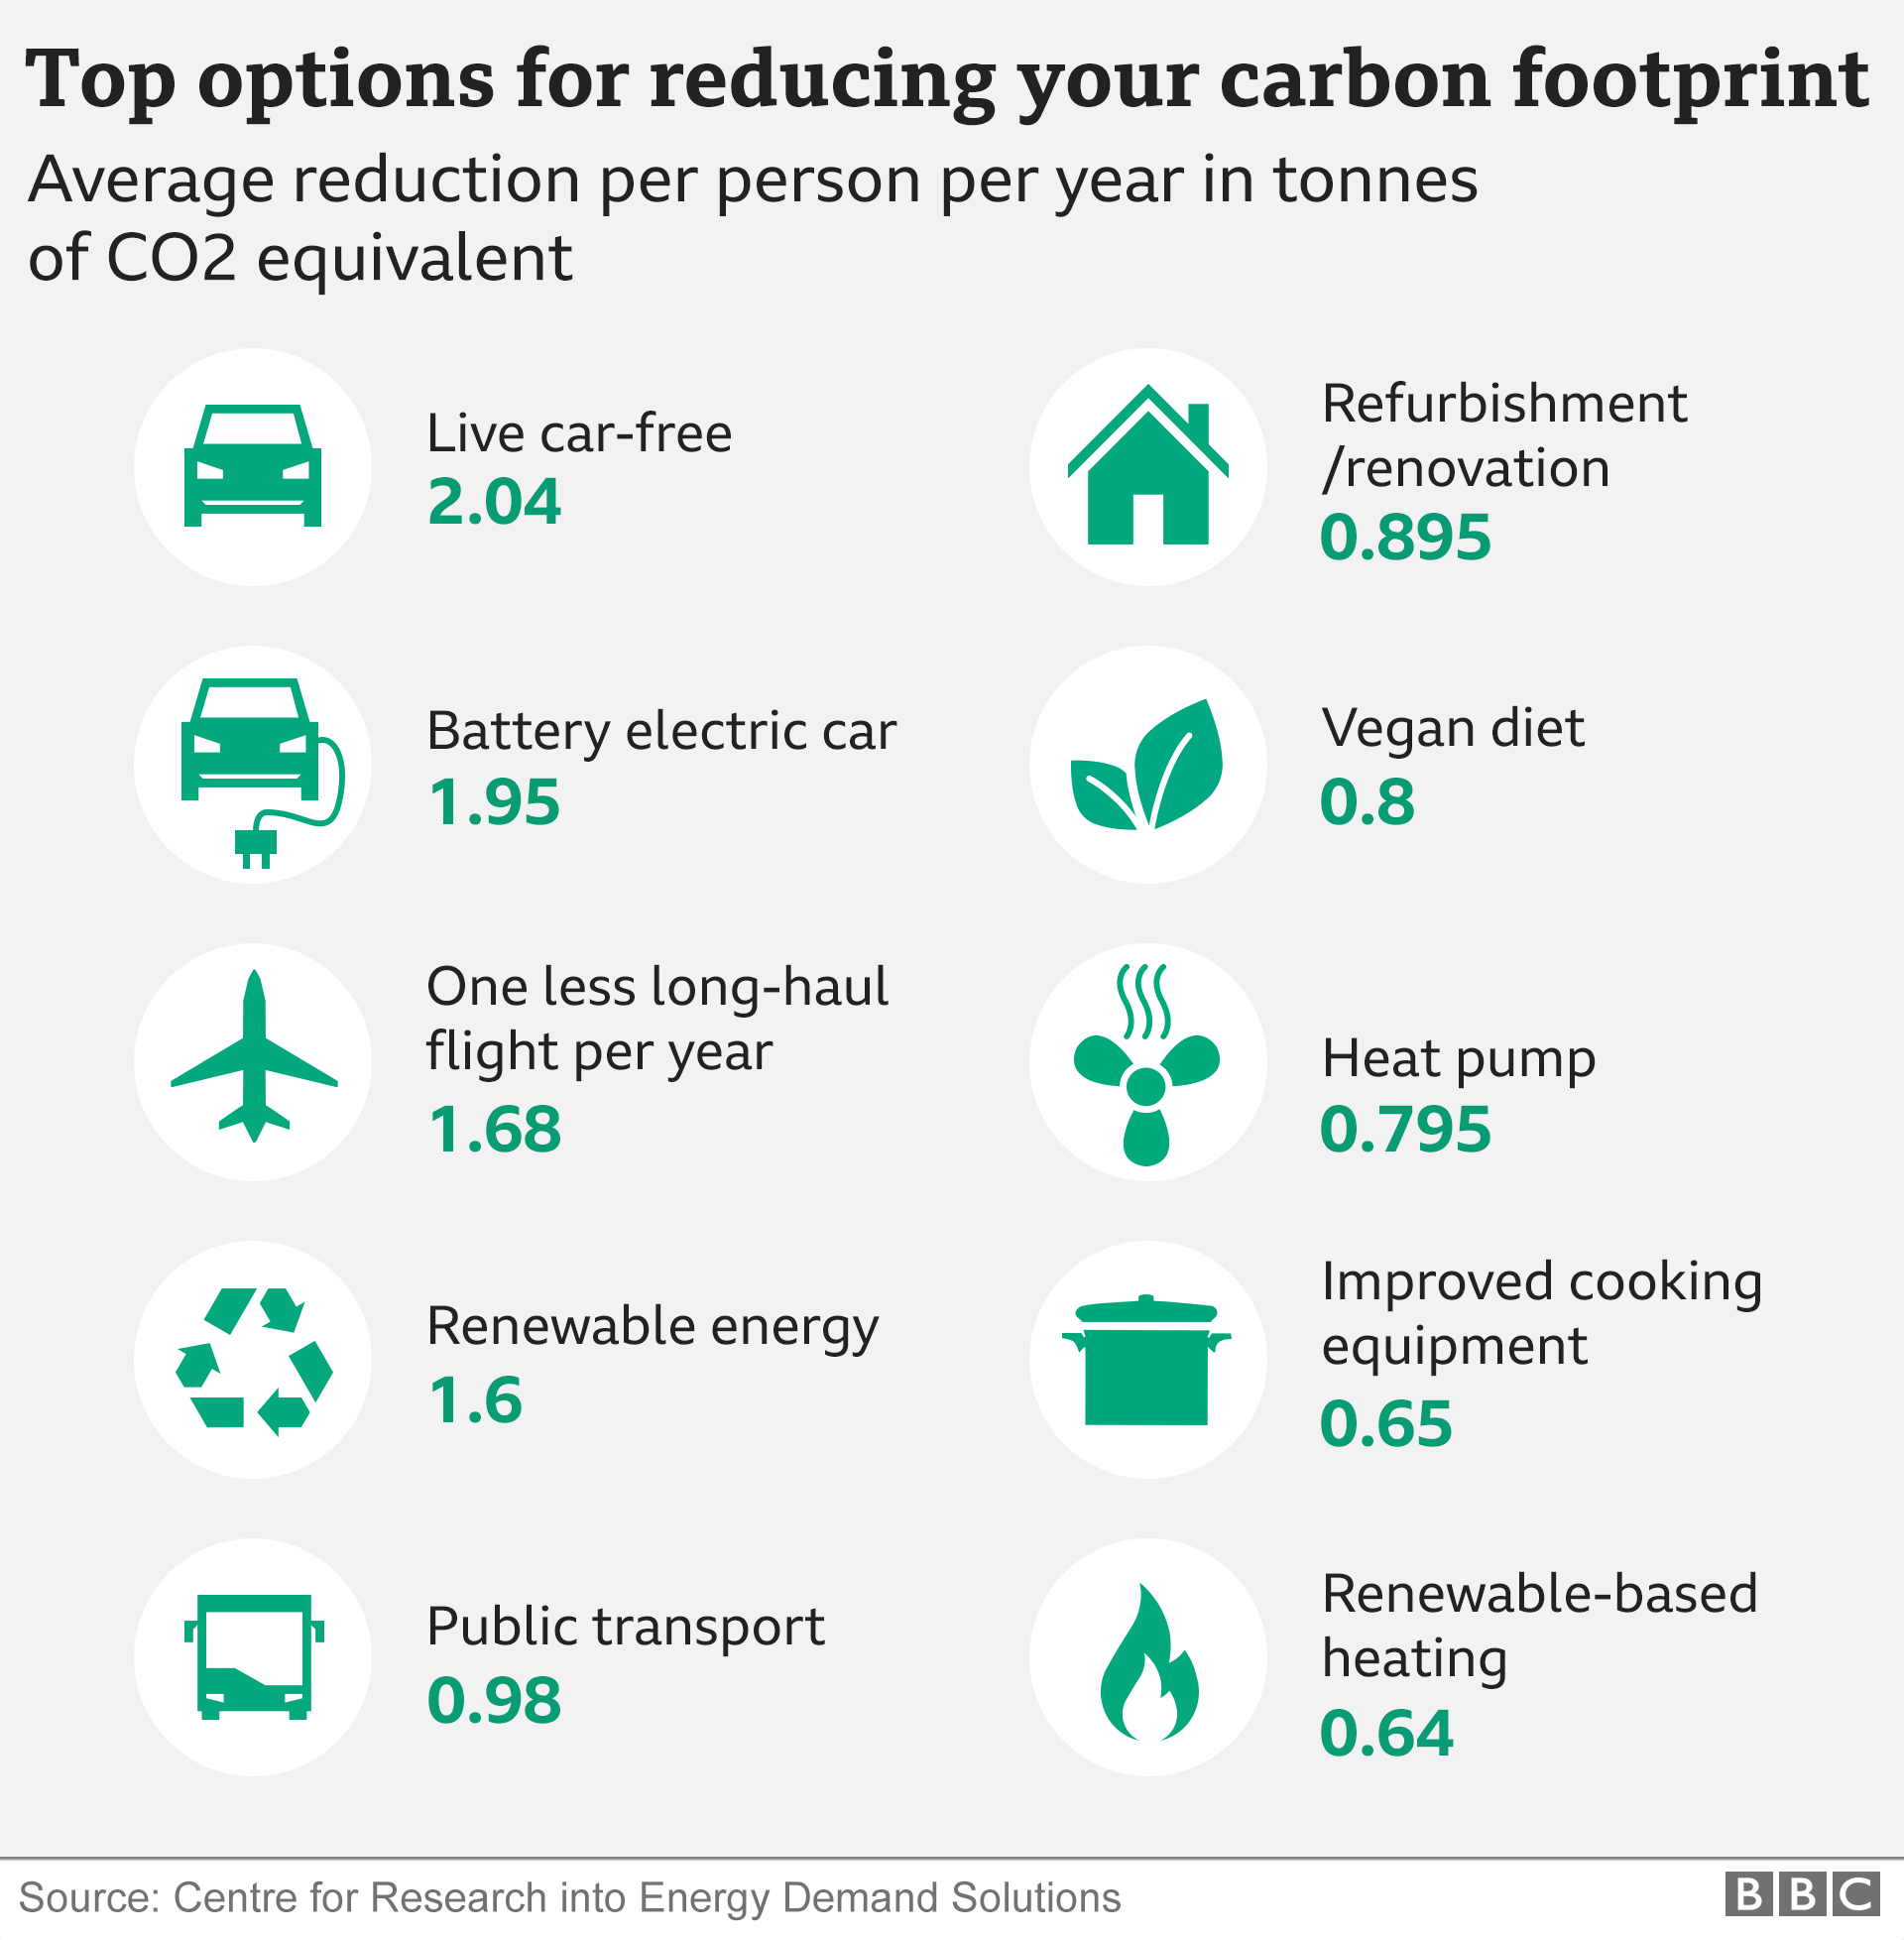 Climate change: Top 10 tips to reduce carbon footprint revealed